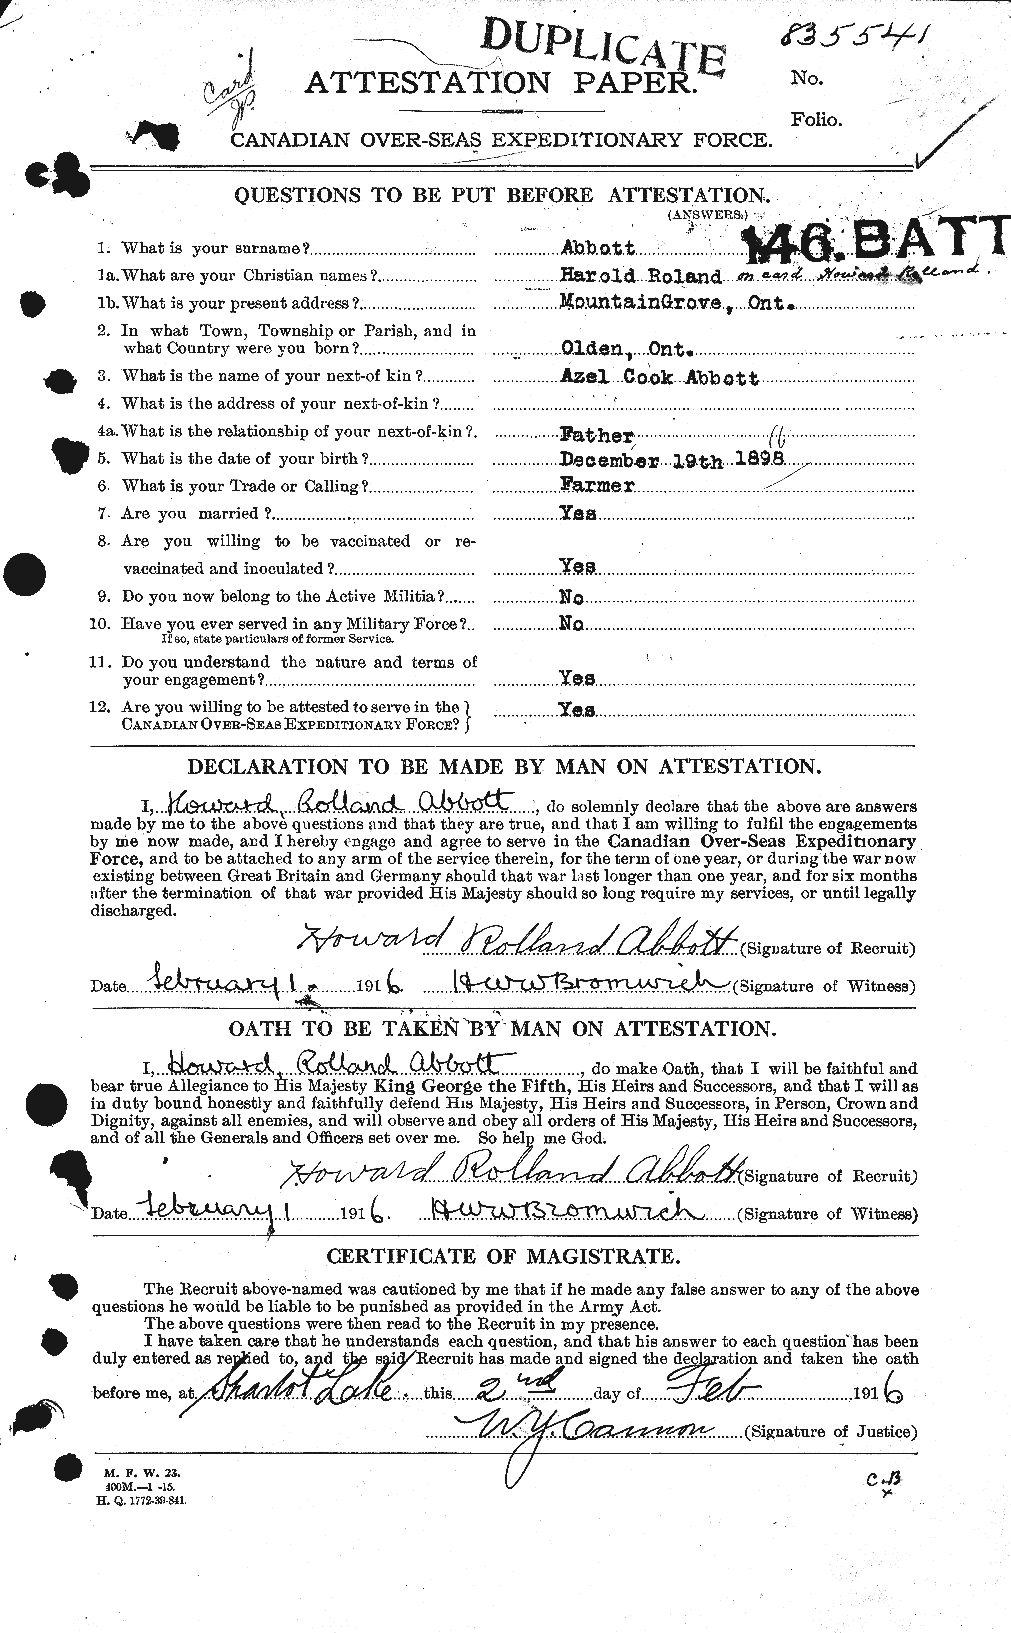 Personnel Records of the First World War - CEF 200958a